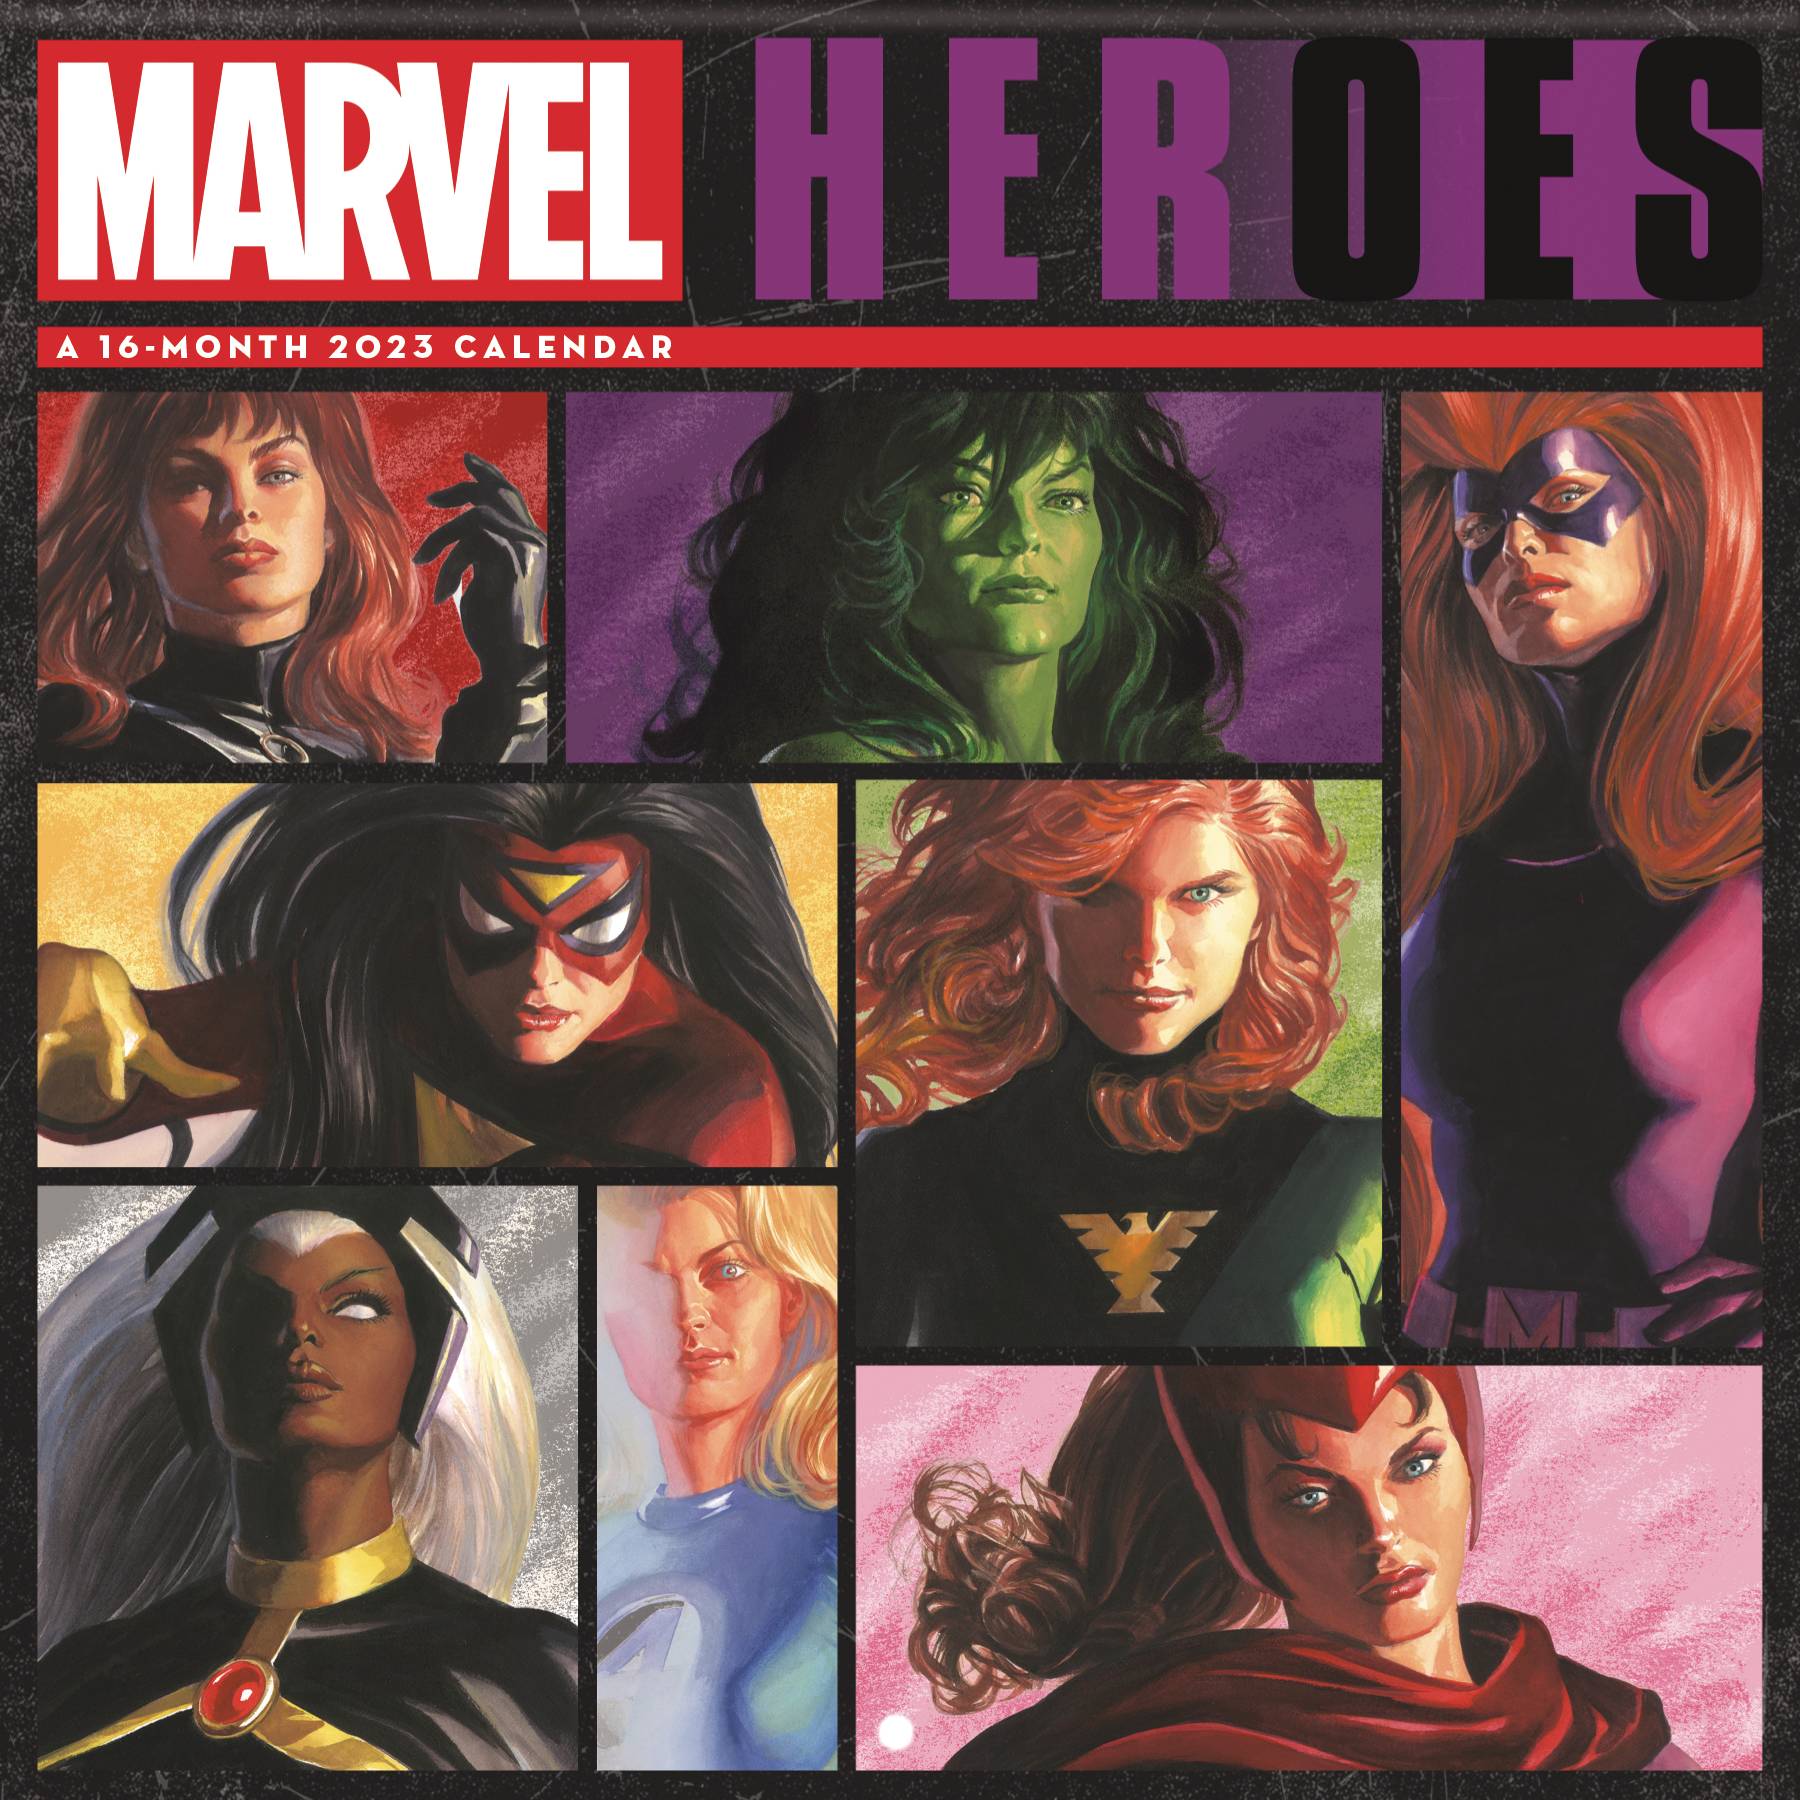 MARVEL HER OES 2023 WALL CALENDAR